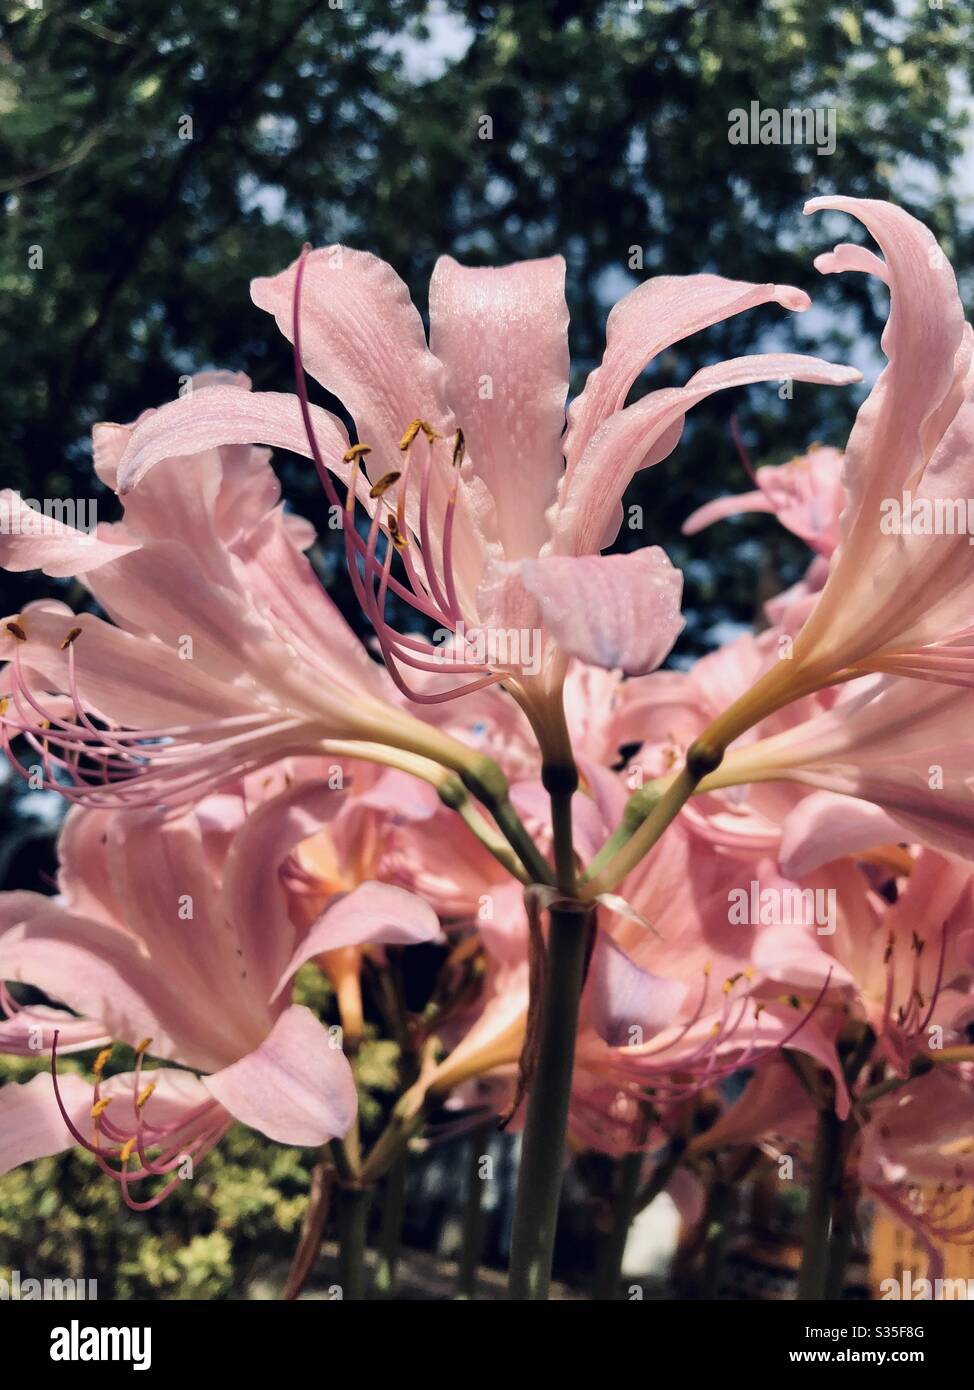 Closeup, Surprise Lily, blossoms, pink colors, upward angle, trees in background, natural, nature, nature’s beauty,flowers, lilies Stock Photo